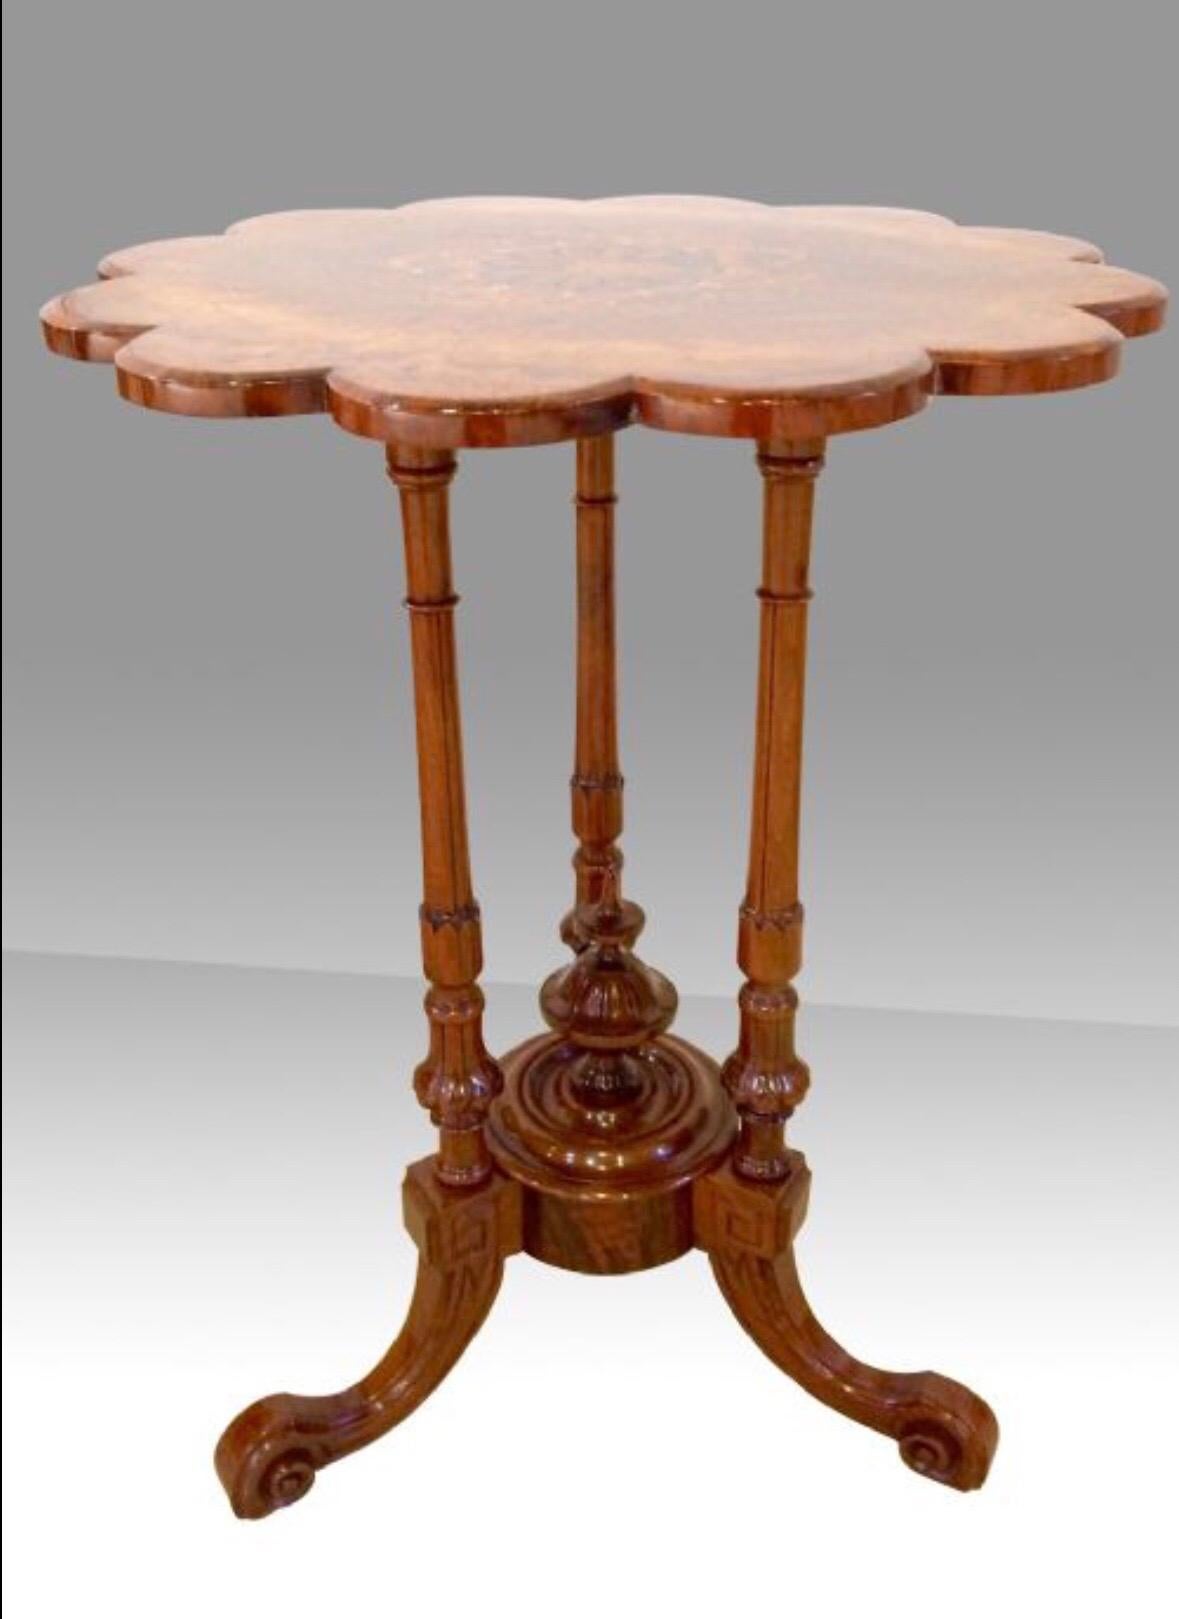 Stunning Victorian inlaid burr
Walnut antique wine, occasional, lamp table with
tri pillar base and shaped top
c1860
Measures: 27 ins high x 21 ins diameter.